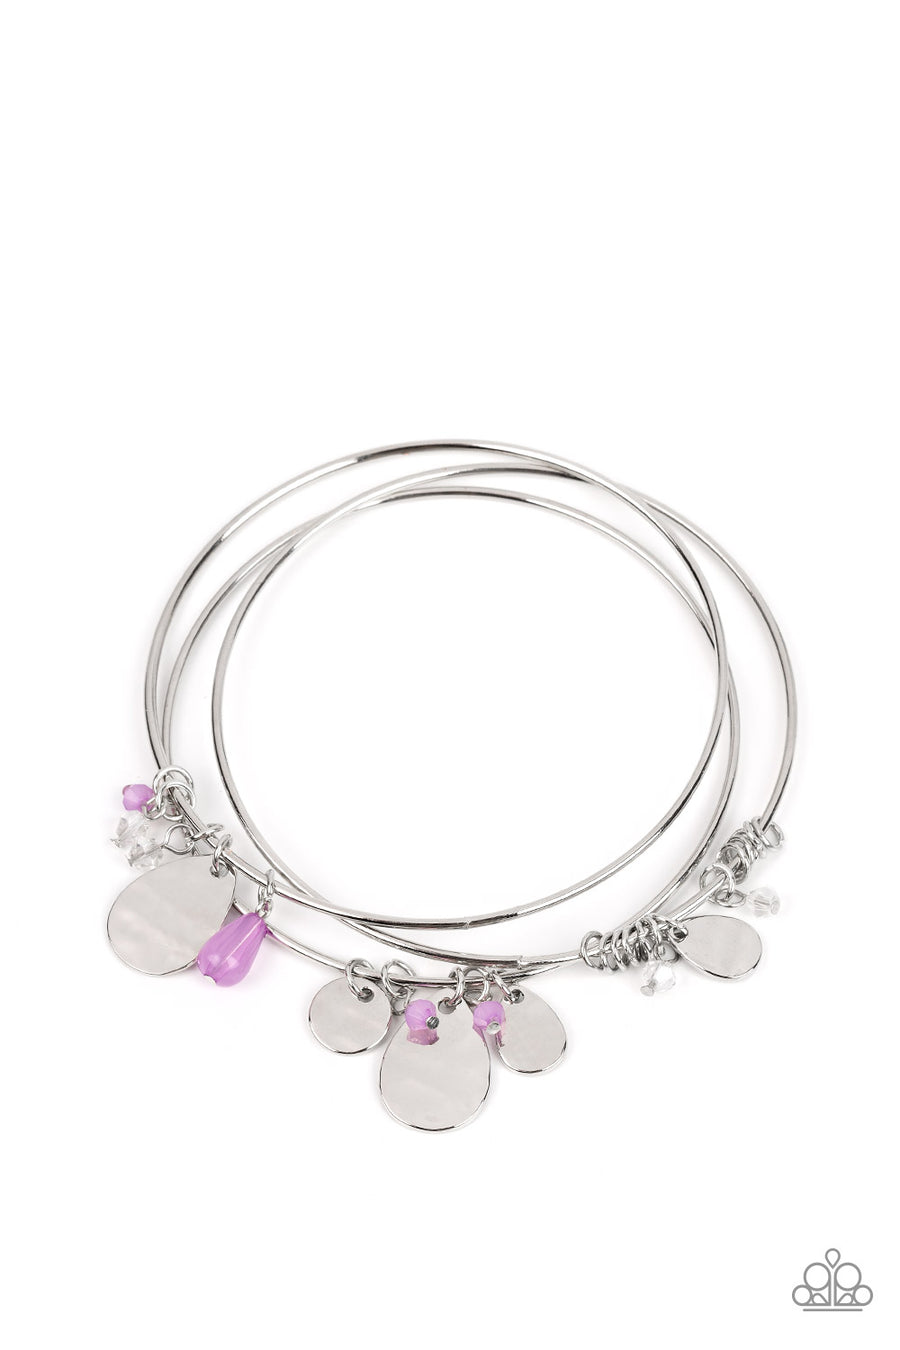 Secret Paradise - Purple and Silver Bracelet - Paparazzi Accessories - A stack of three silver bangles are adorned with hammered silver discs, tiny purple beads in varying opacities, and sleek silver links, creating soft, charming layers around the wrist. Sold as one set of three bracelets.